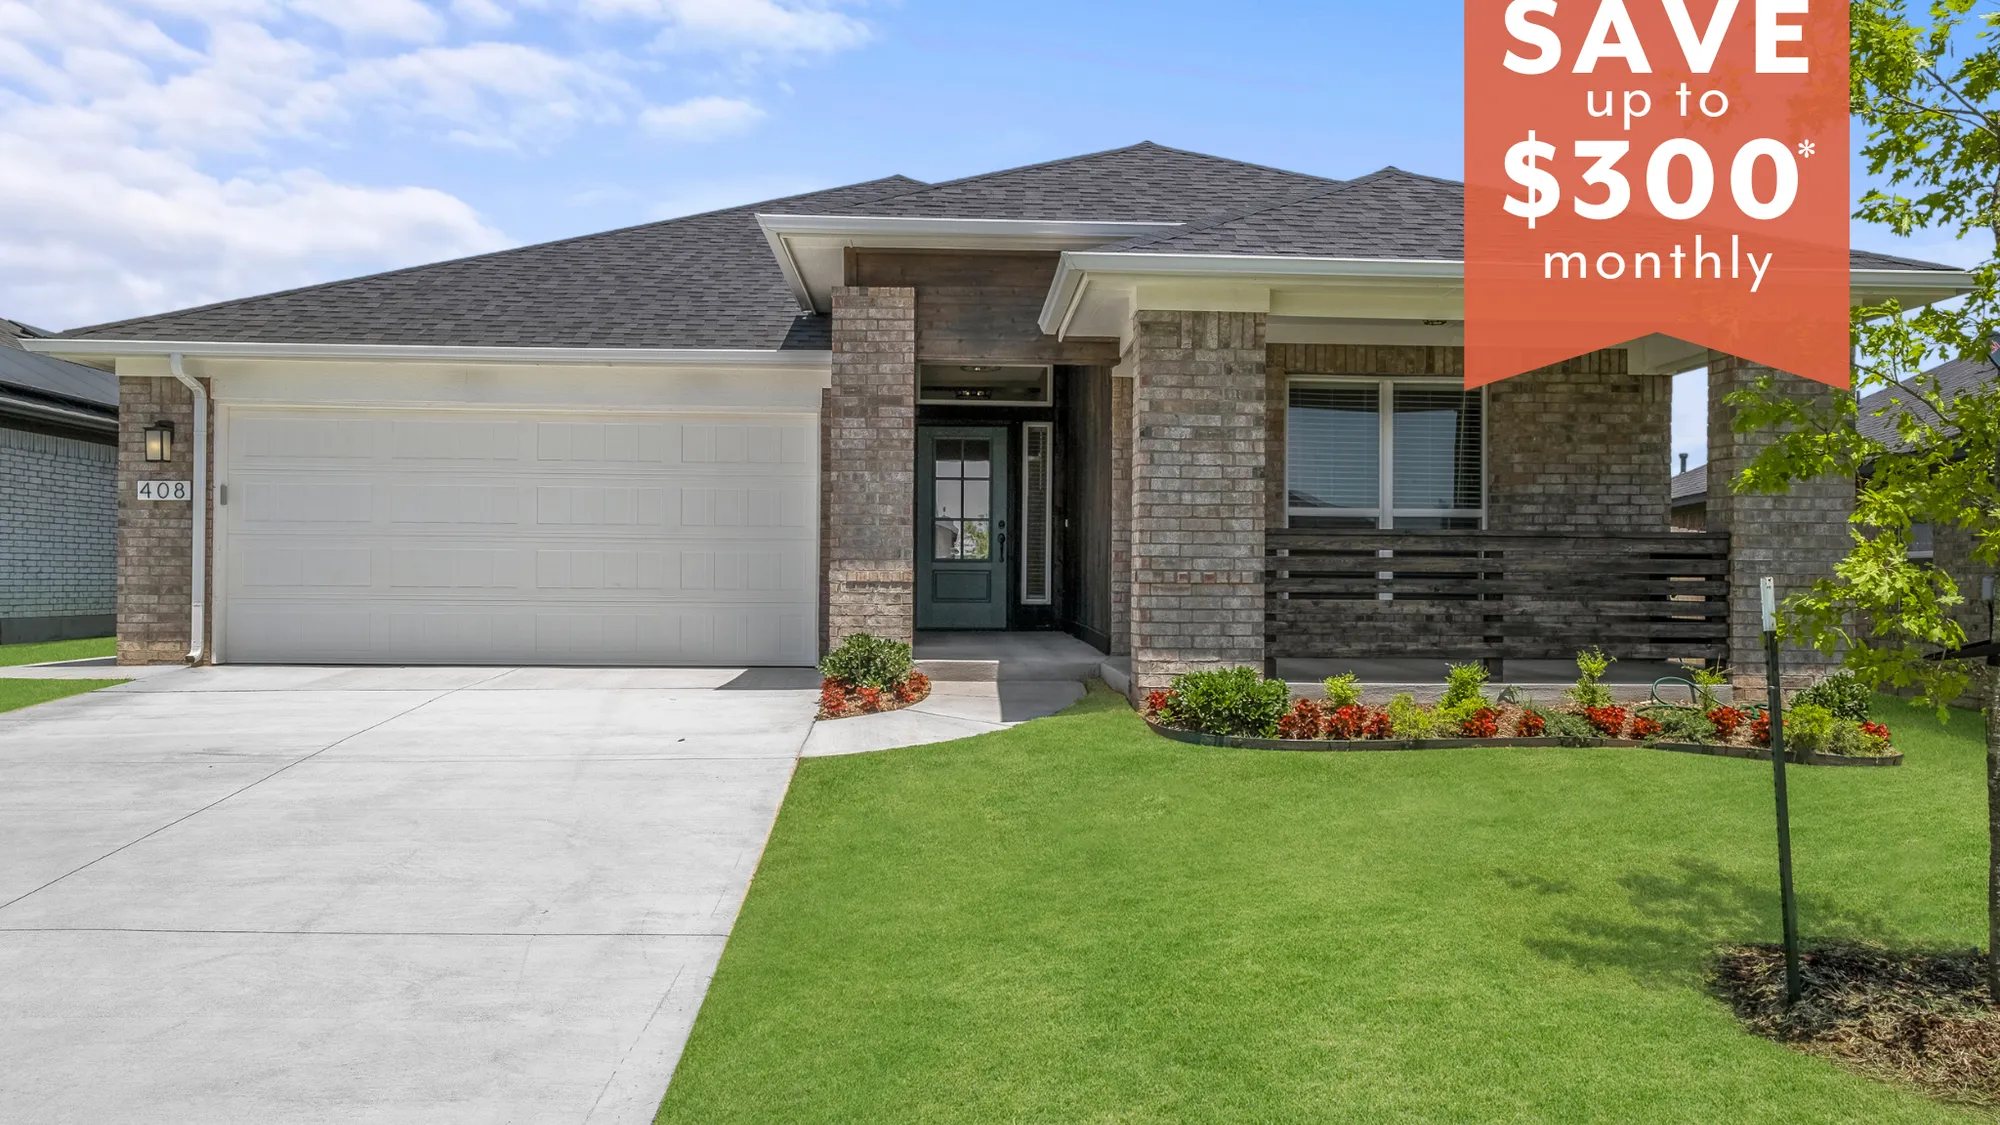 Jefferson. Save up to $300* monthly on this Mustang, OK New Home